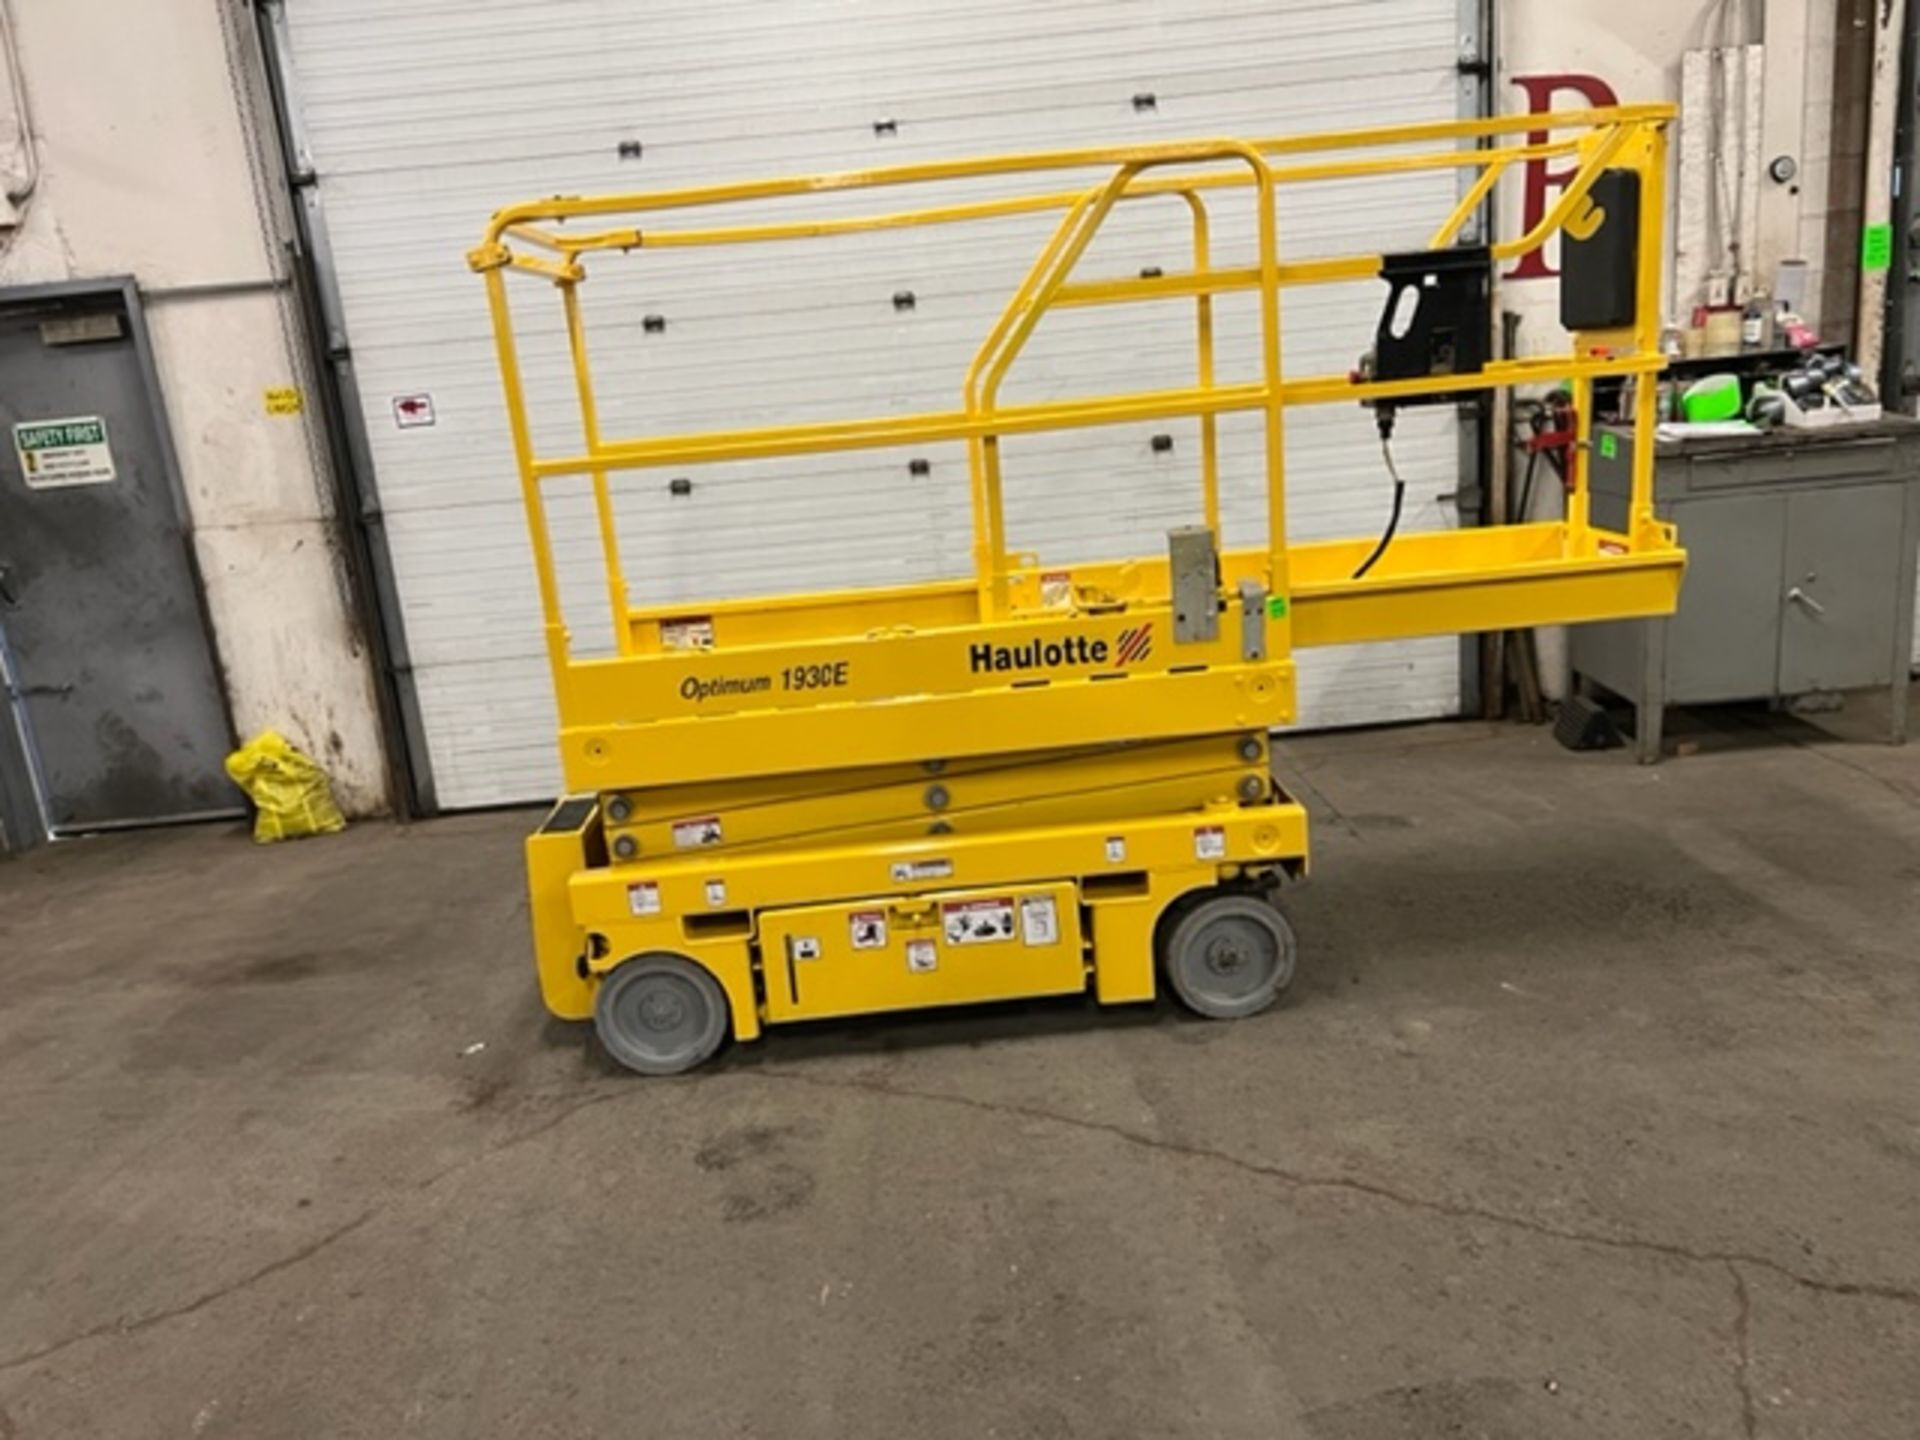 2015 Haulotte 1930E Electric Scissor Lift 500lbs Capacity with 19' platform height 24V unit with - Image 3 of 4